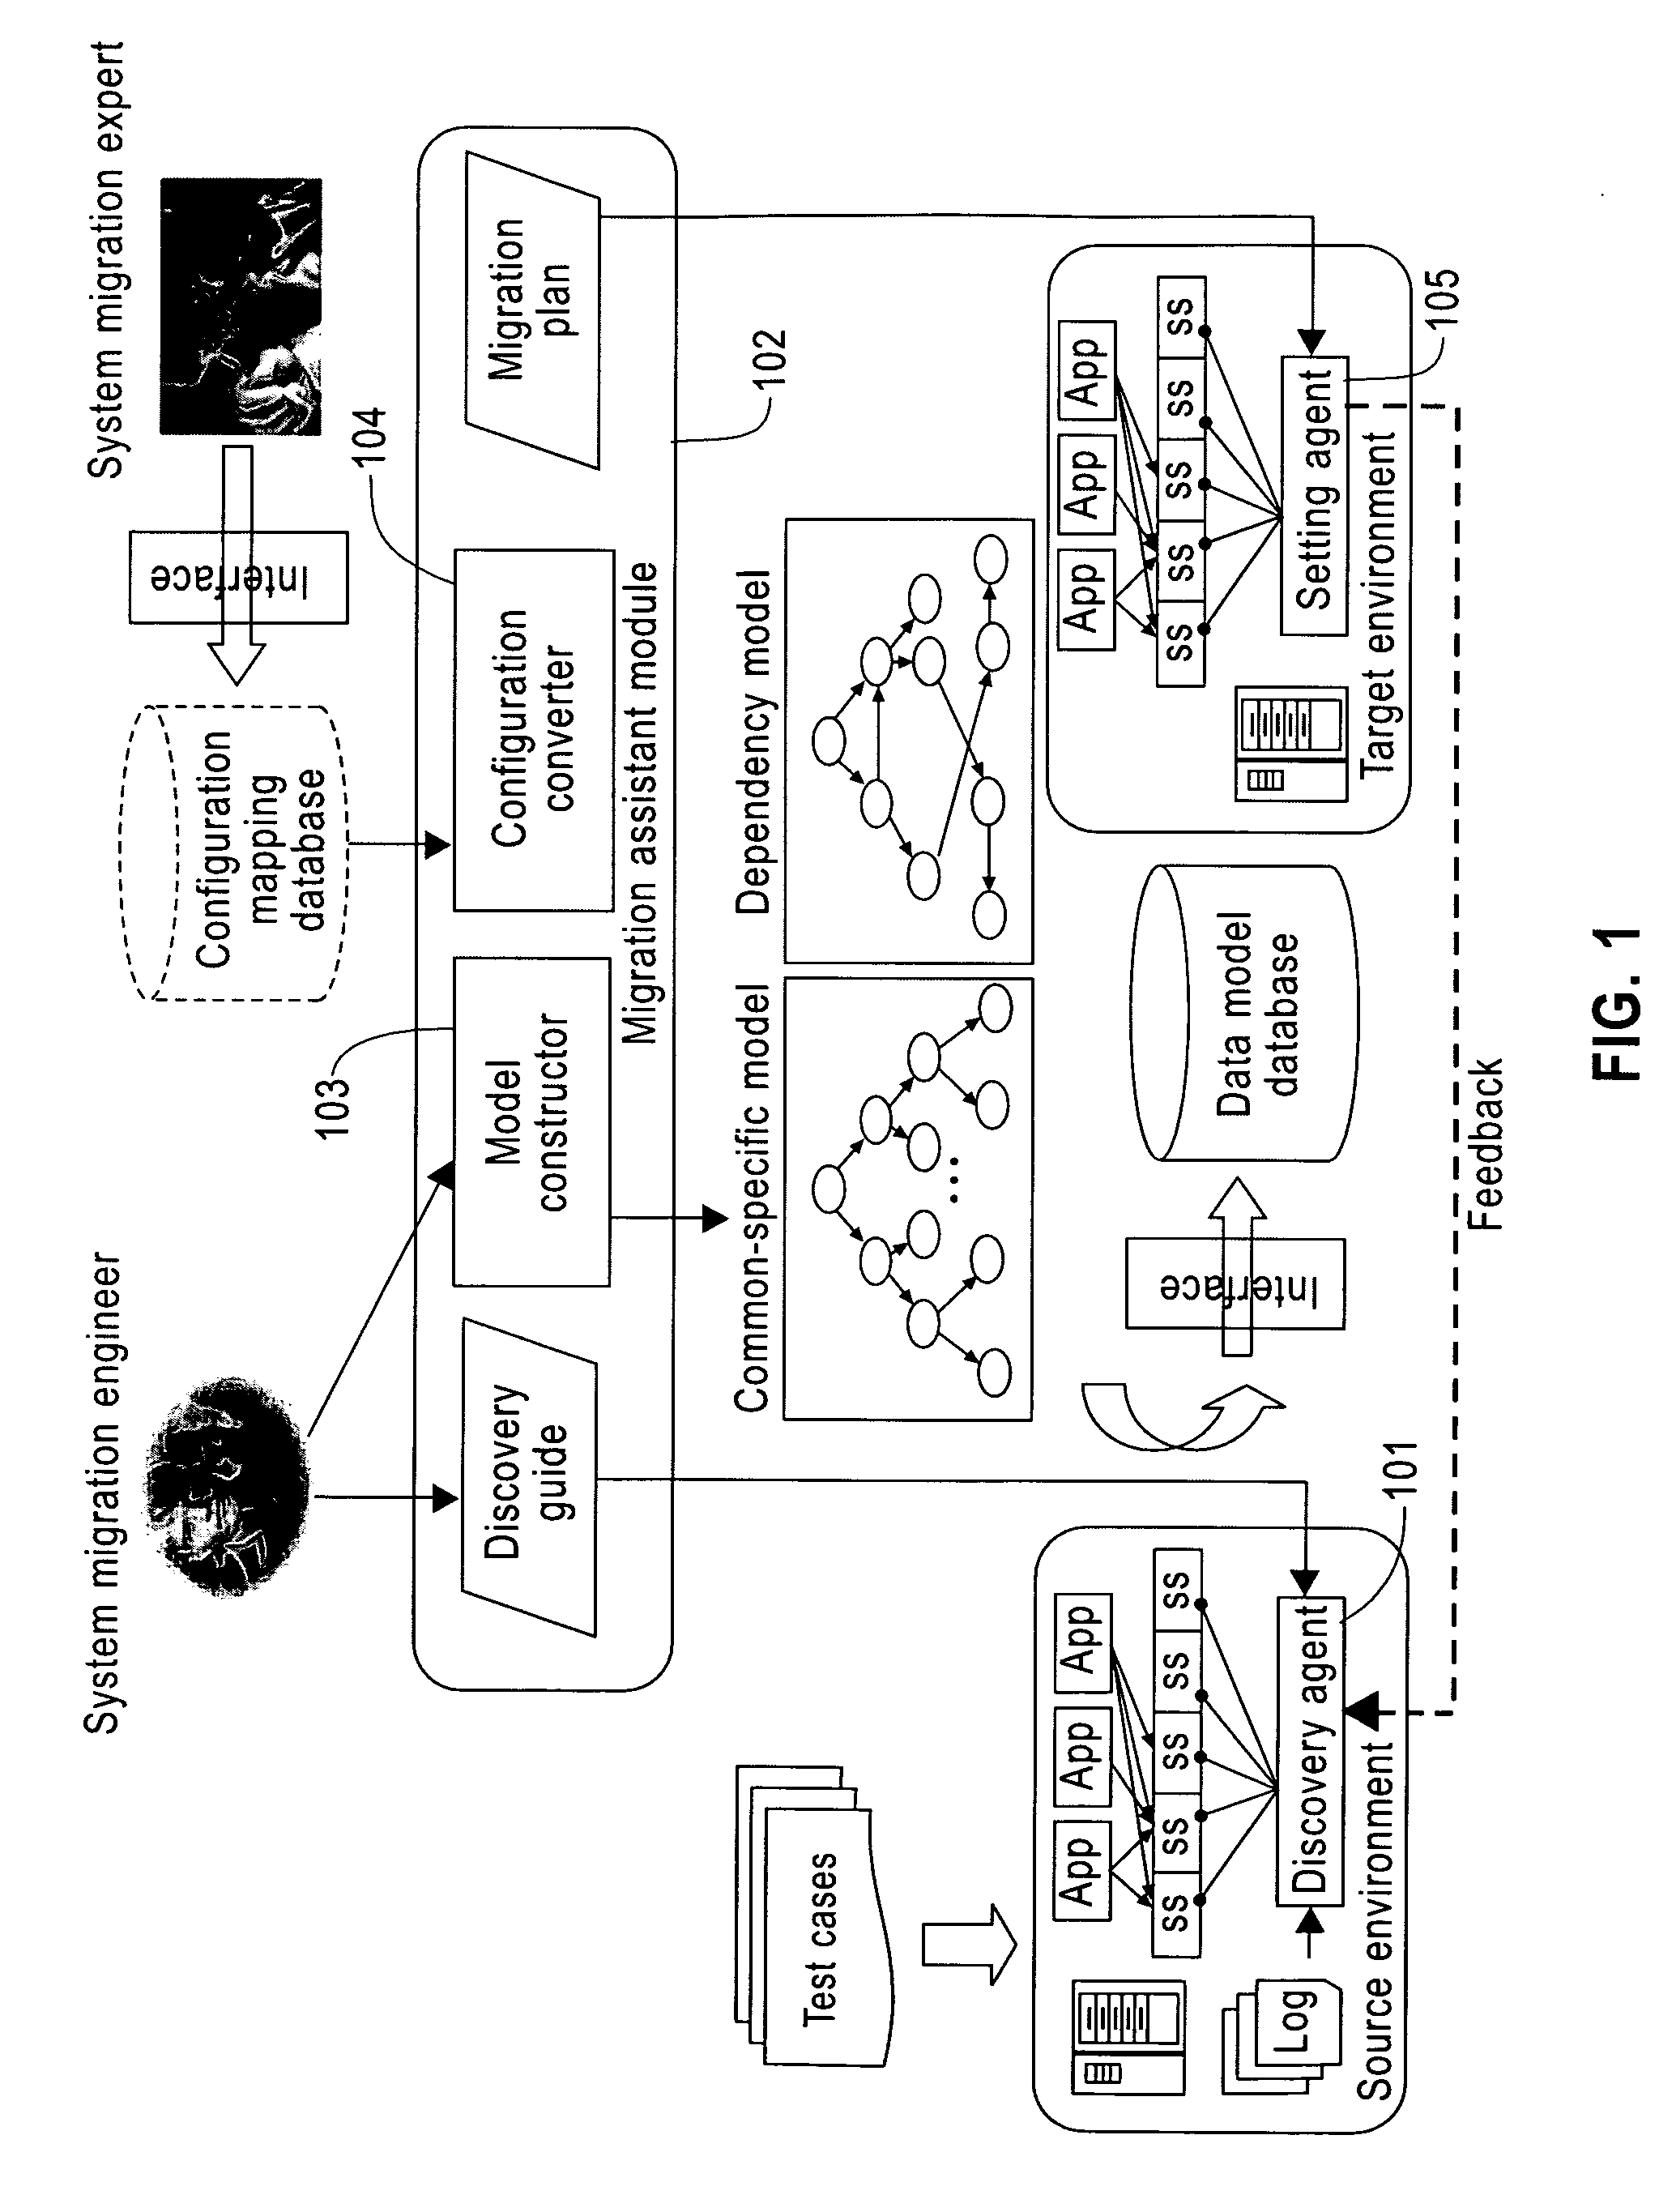 Method and apparatus for migrating the system environment on which the applications depend